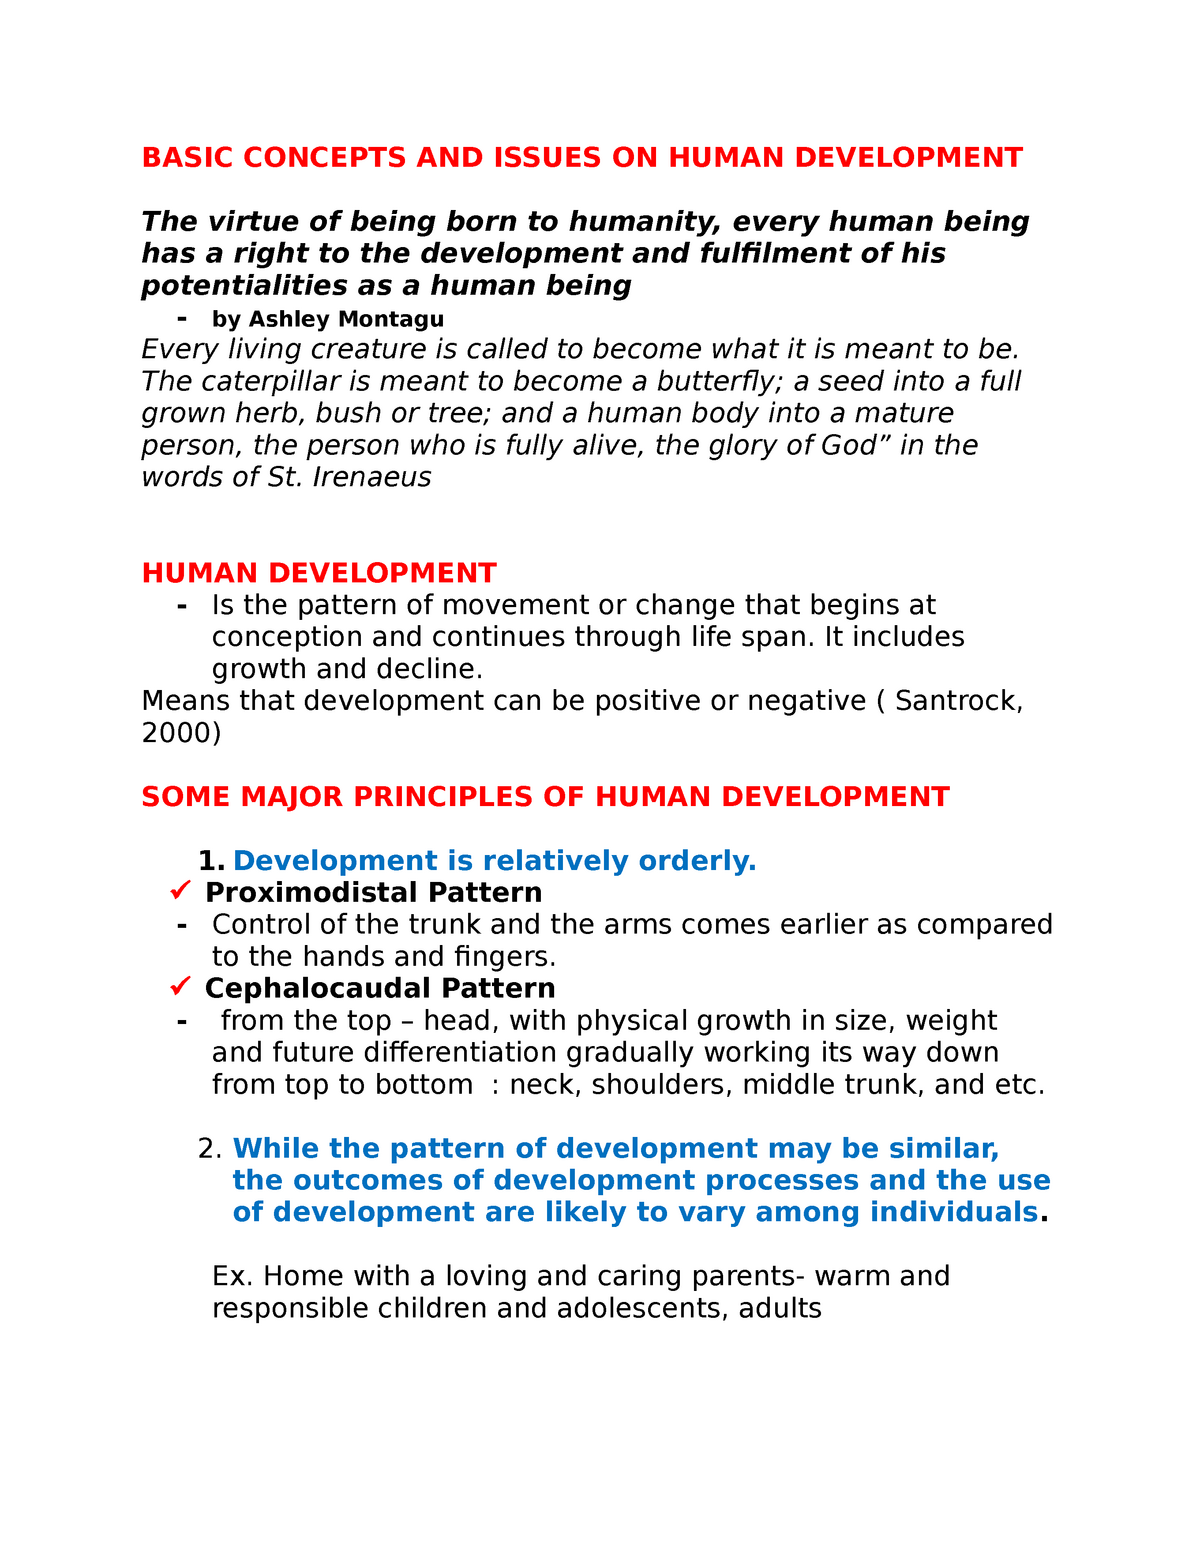 thesis about issues on human development